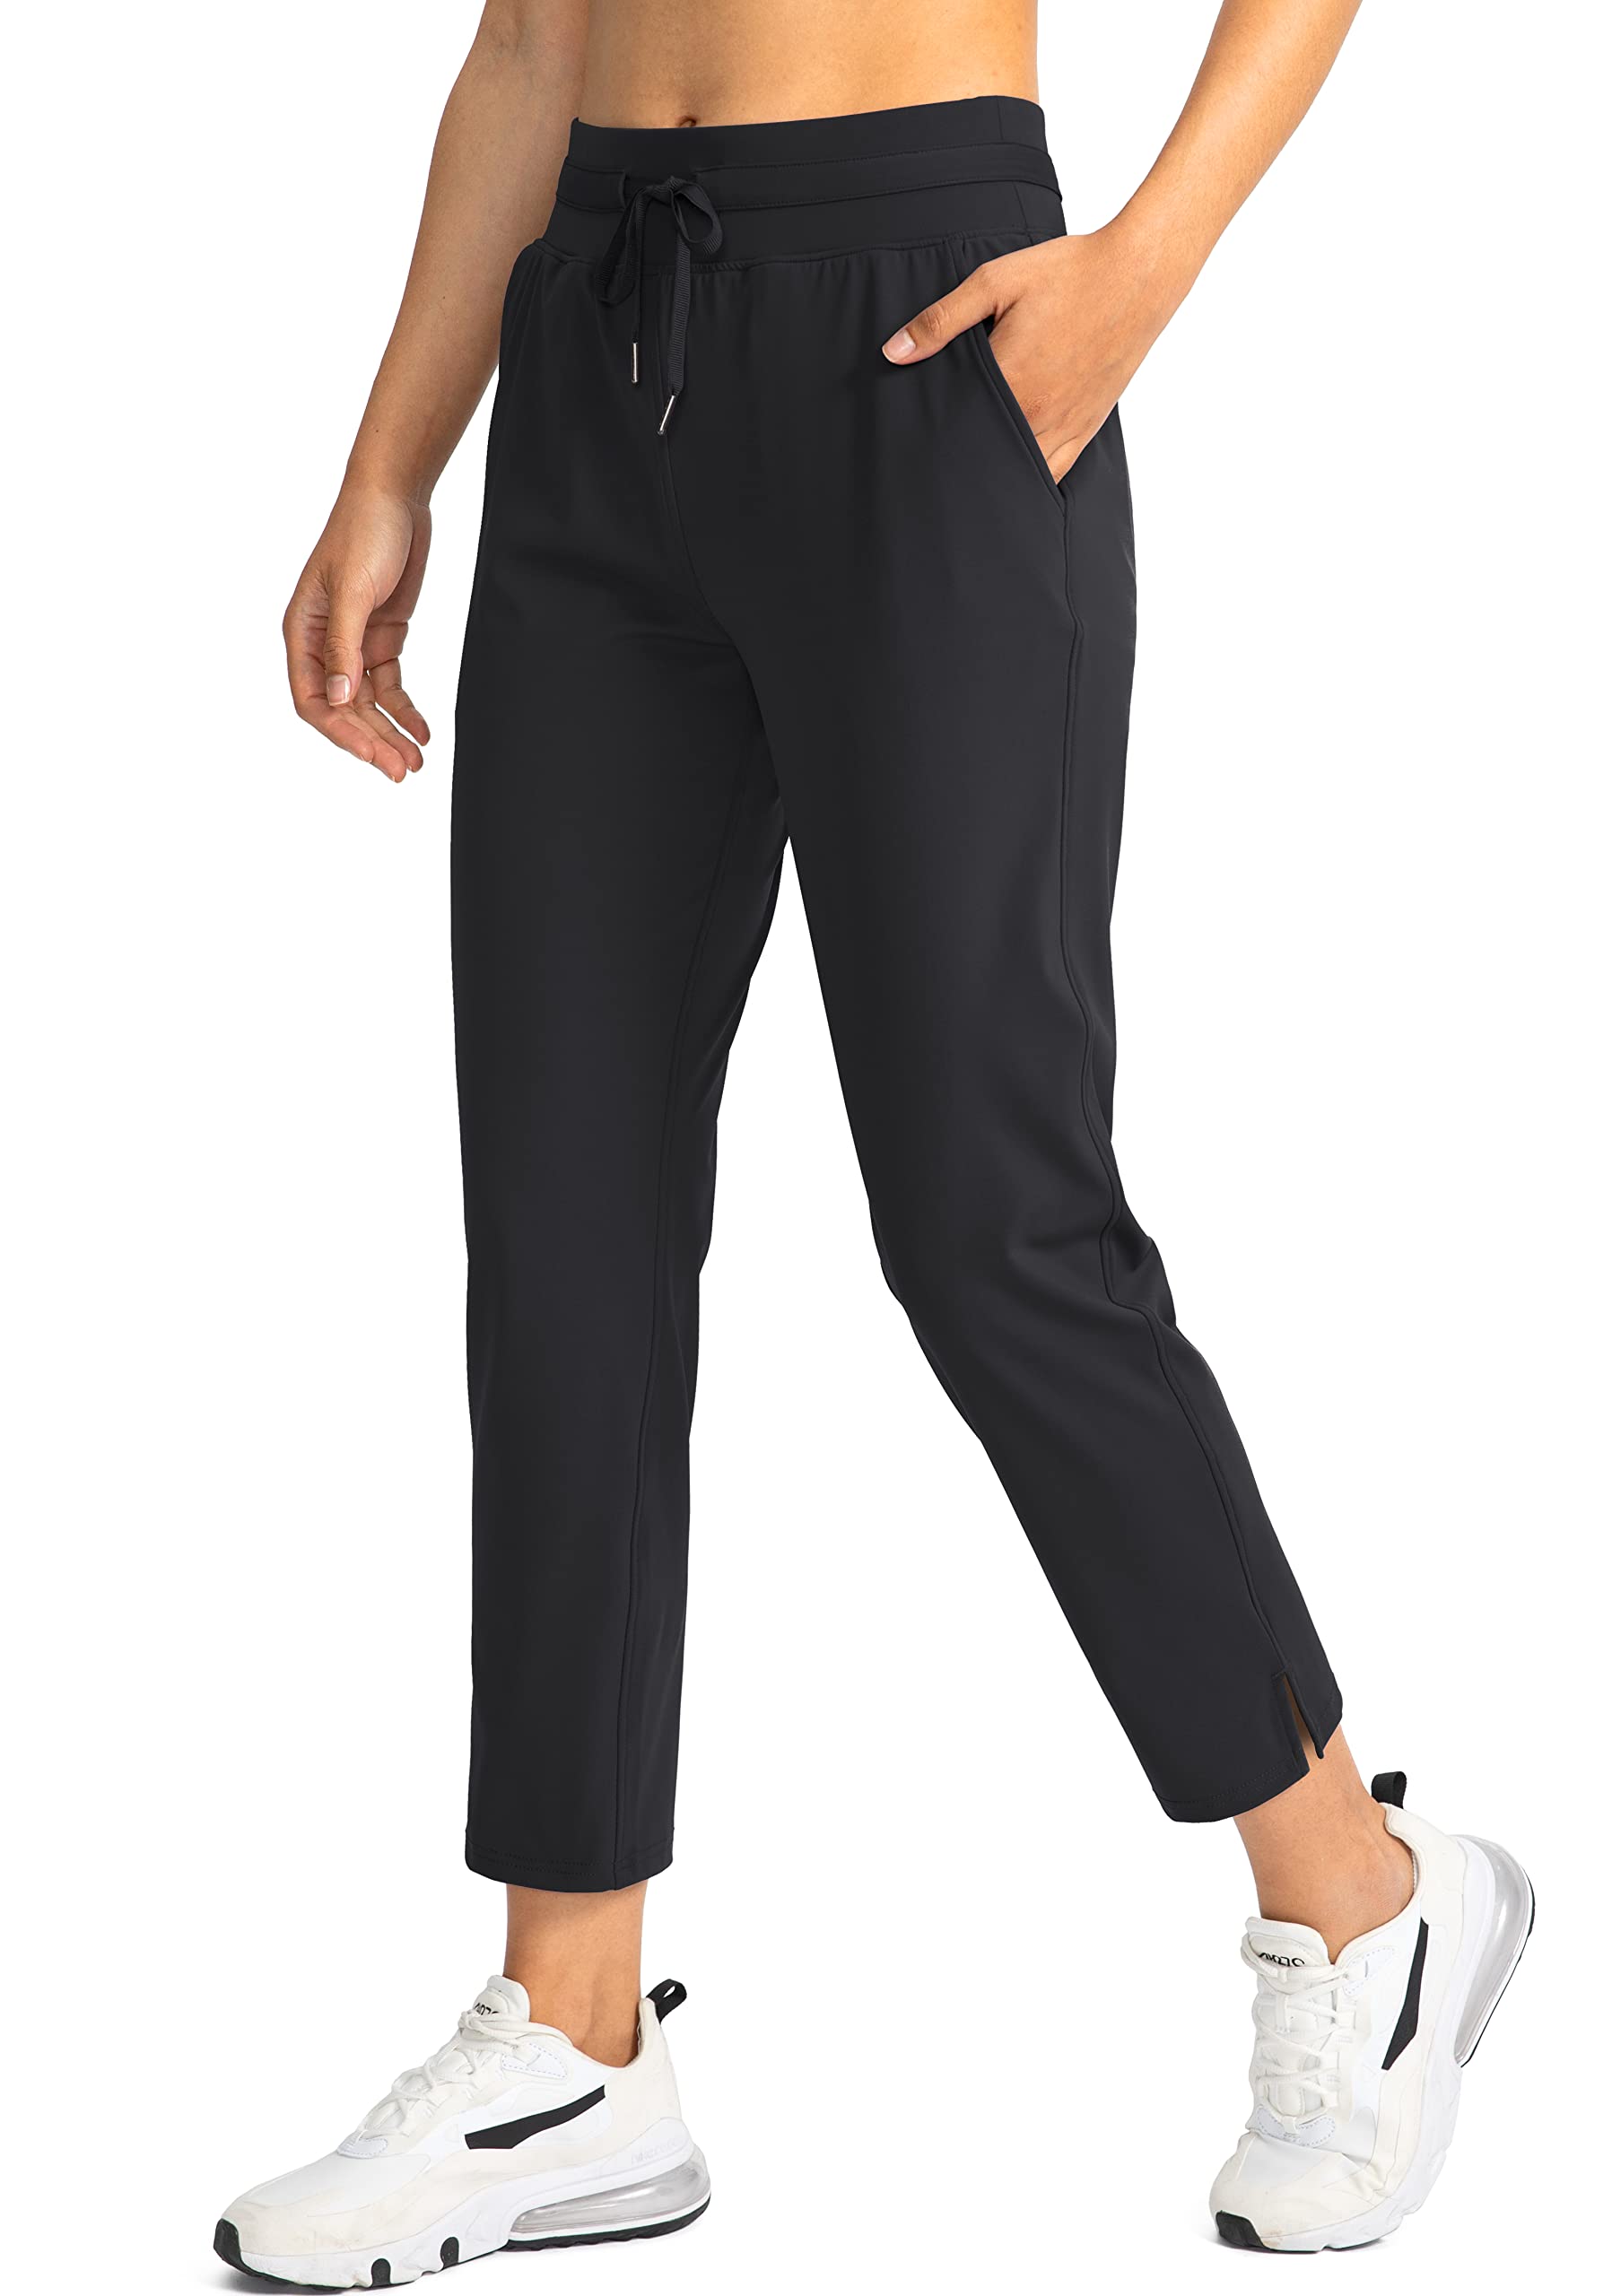 SANTINY Women's Golf Pants with 3 Zipper Pockets 7/8 Stretch High Waisted  Ankle Pants for Women Travel Work Black Medium